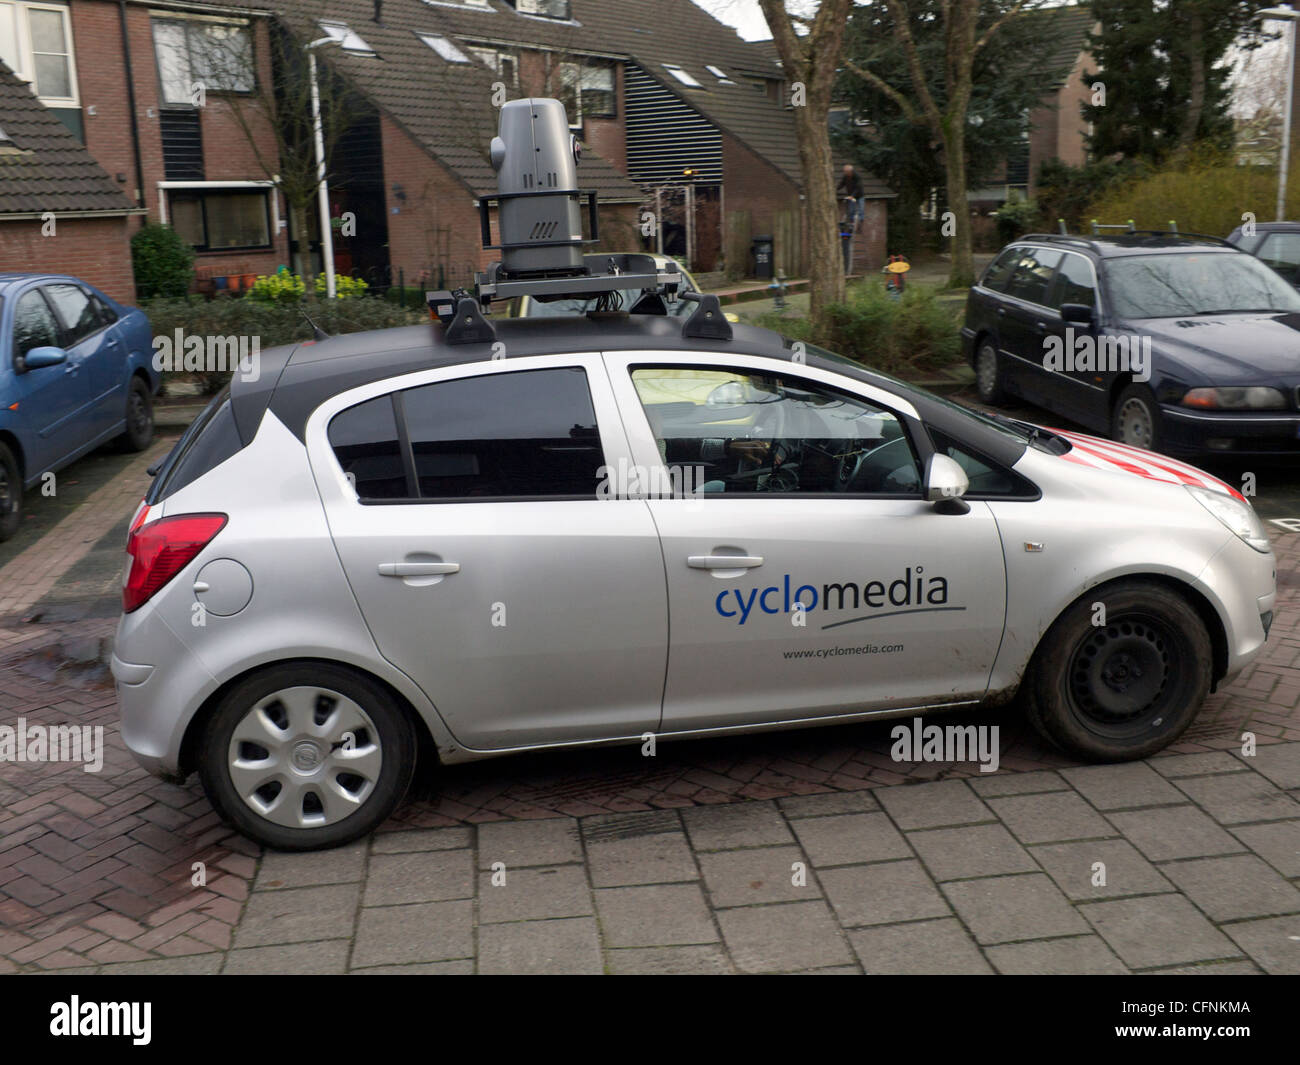 Cyclomedia camera car driving through residential area in Hilversum the Netherlands Stock Photo